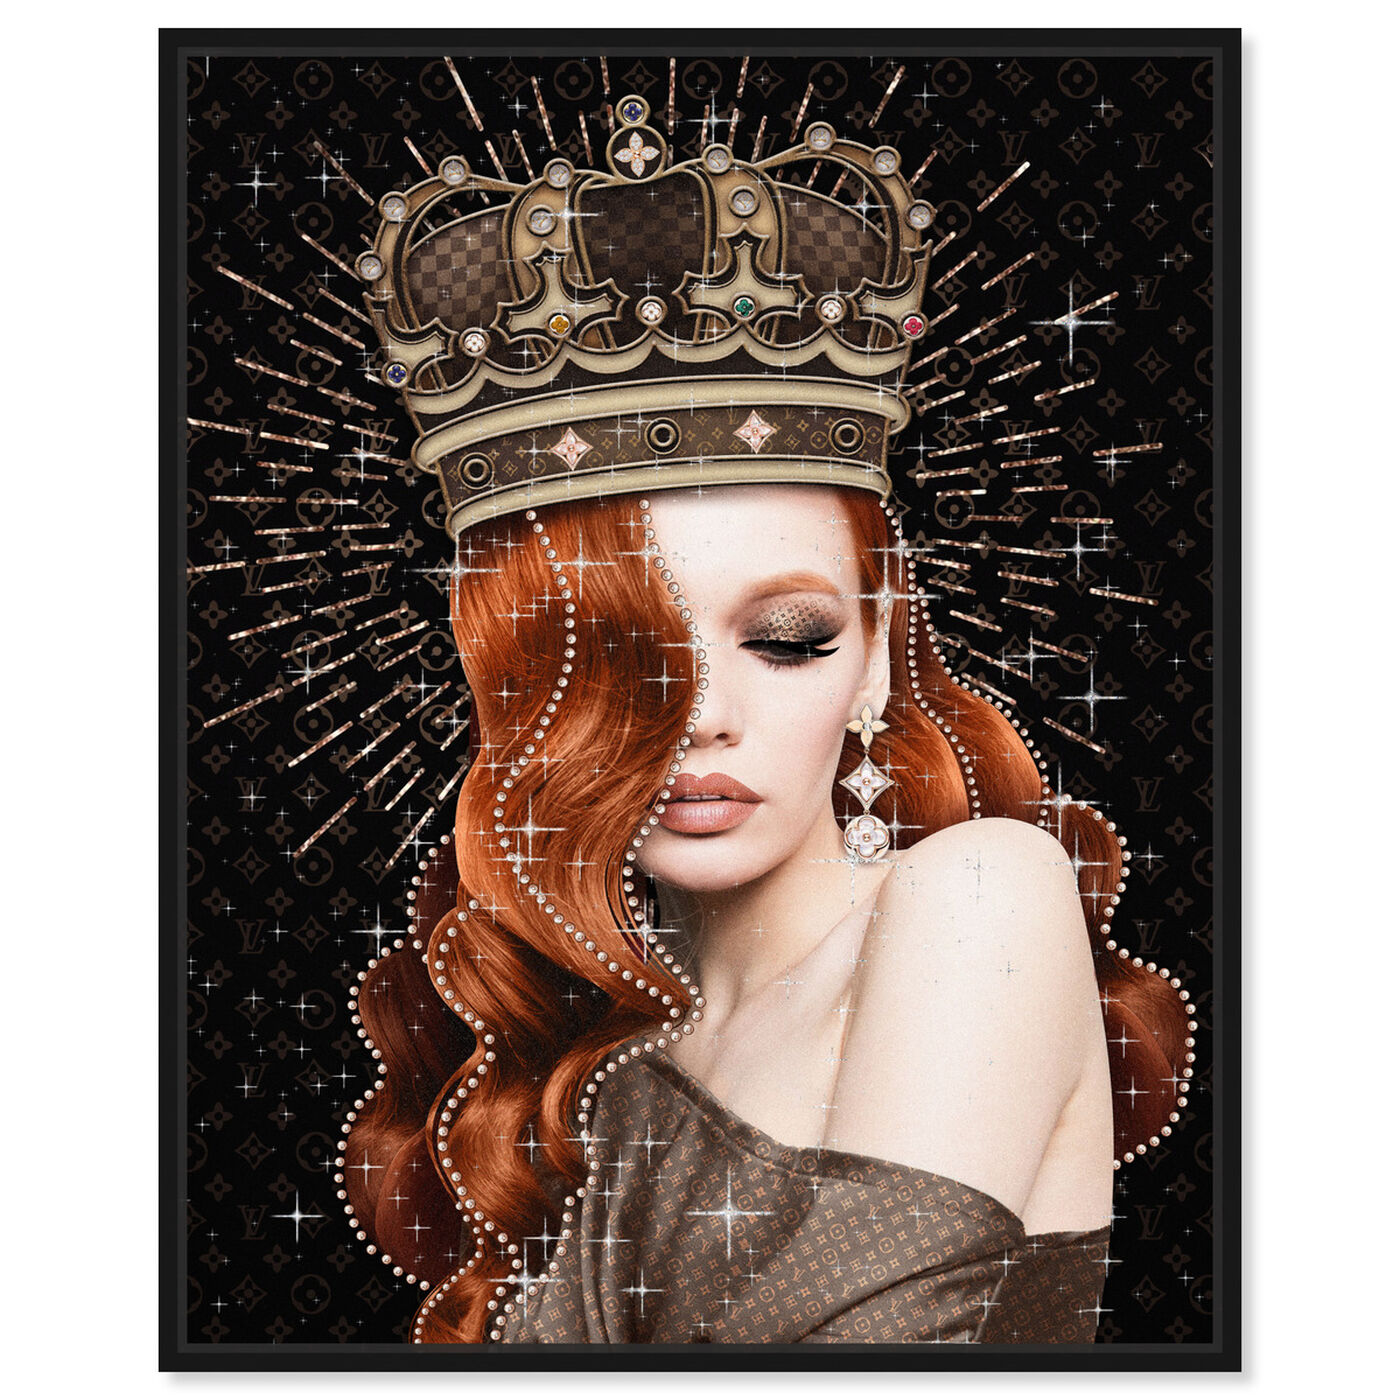 Front view of Merida Queen featuring fashion and glam and portraits art.